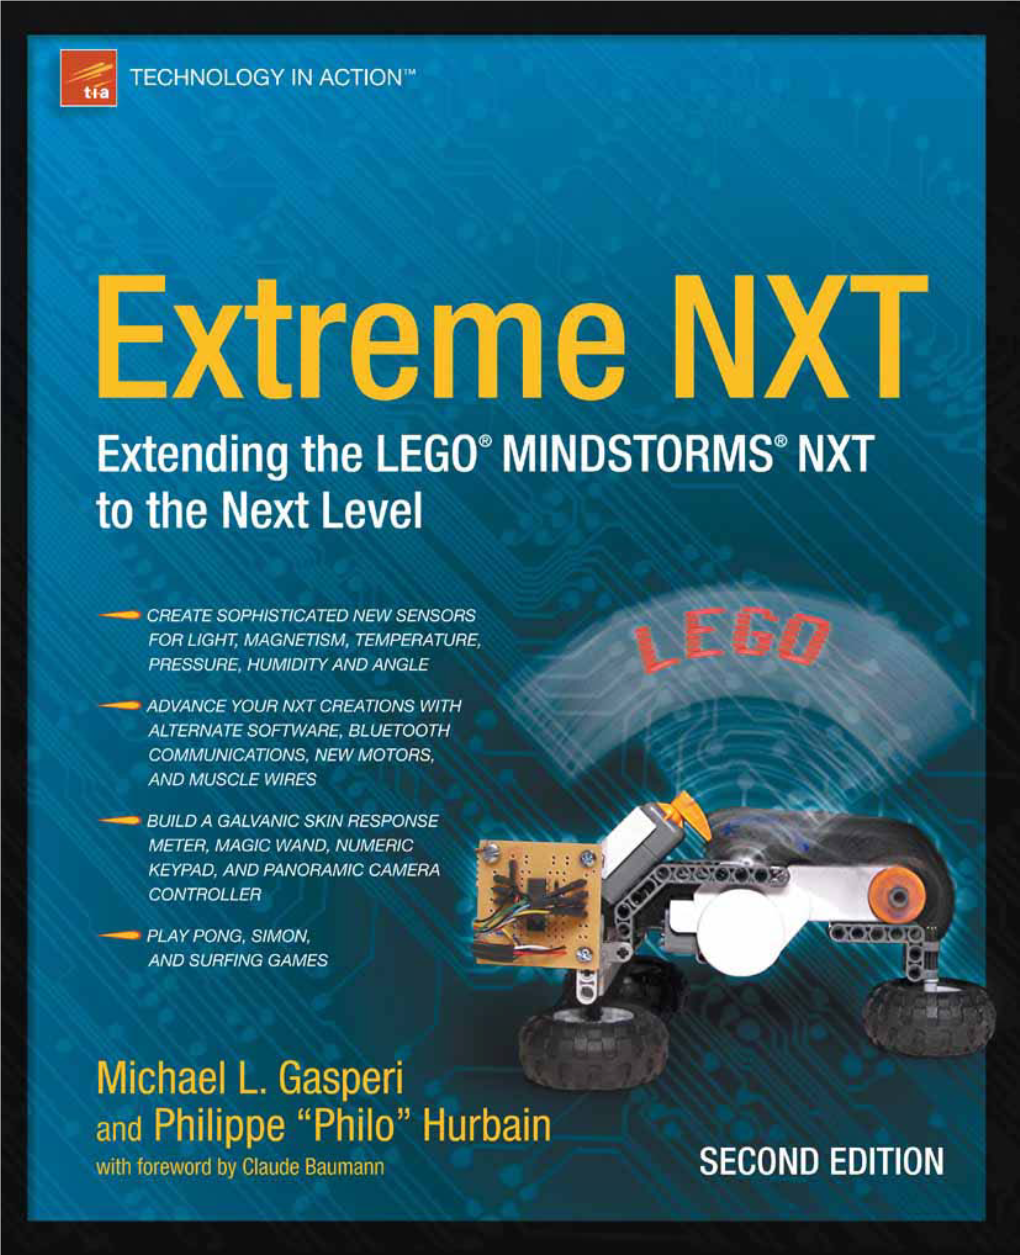 Extending the LEGO MINDSTORMS NXT to the Next Level Second Edition